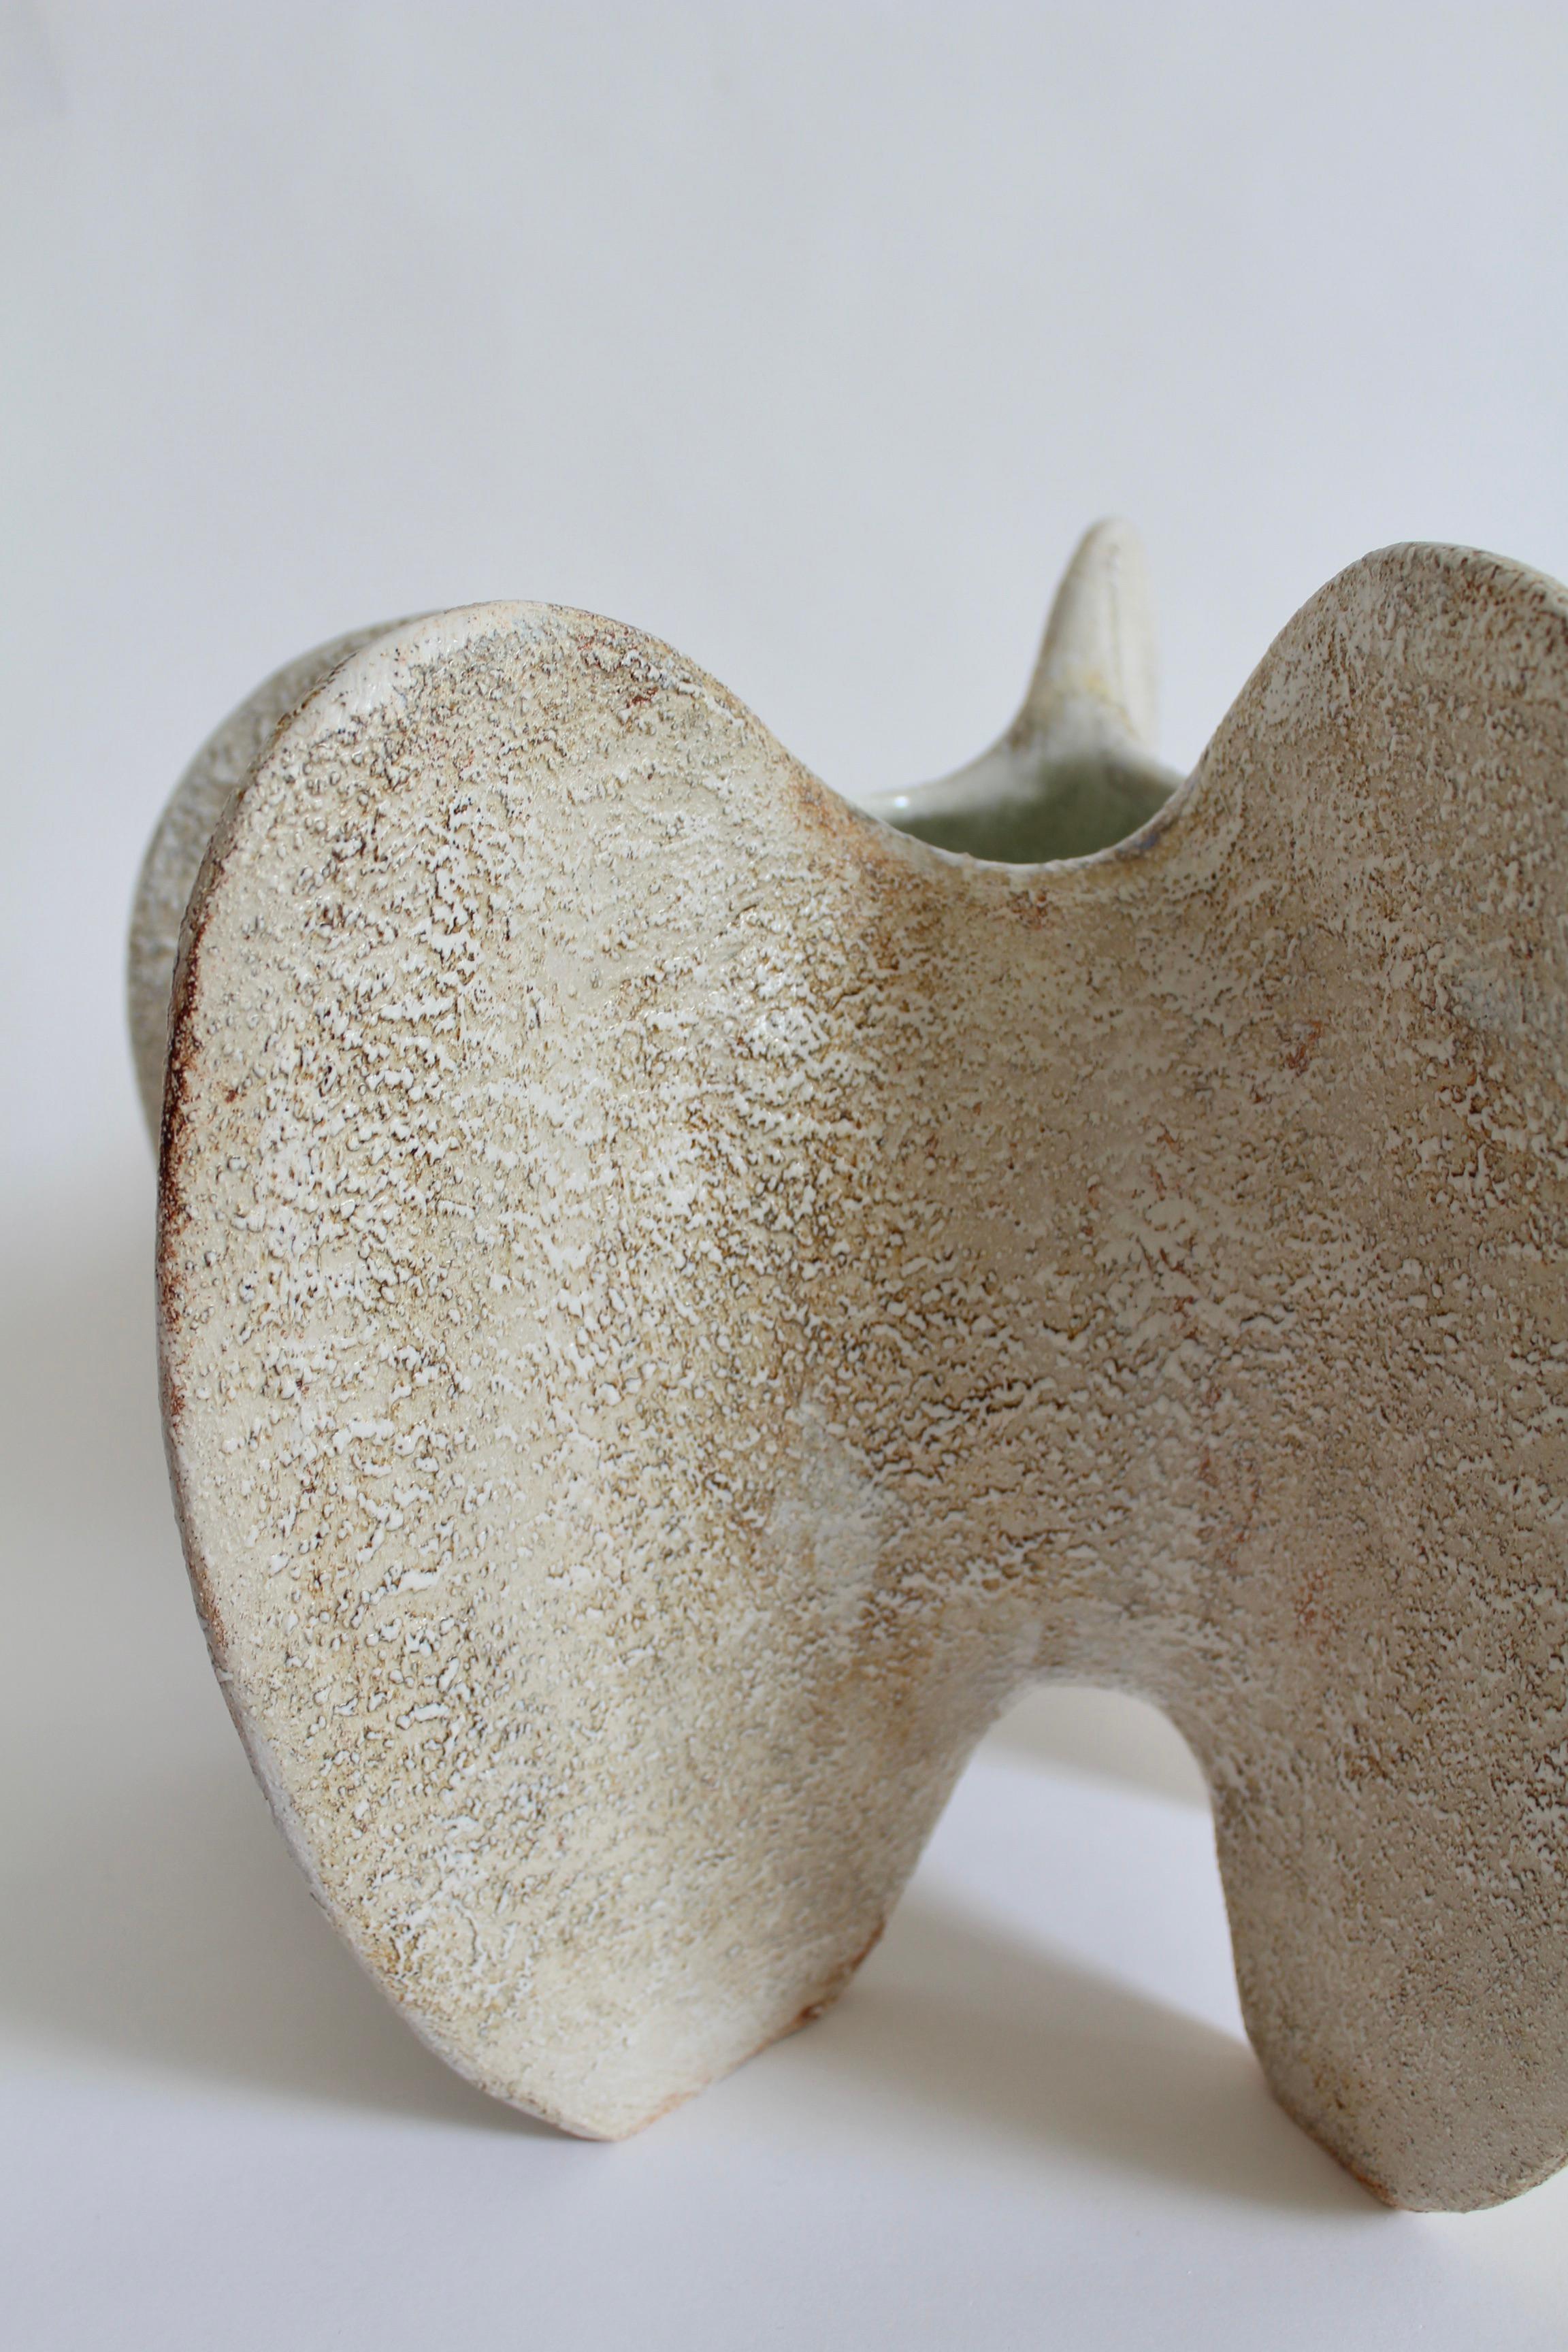 Ivory pentacle IX by Julie Nelson
One of a Kind
Dimensions: W 36 x D 38 x H 26 cm
Materials: Ceramic stoneware and porcelain

Artist Julie Nelson uses the materiality of clay as a means to explore naturally occurring patterns and